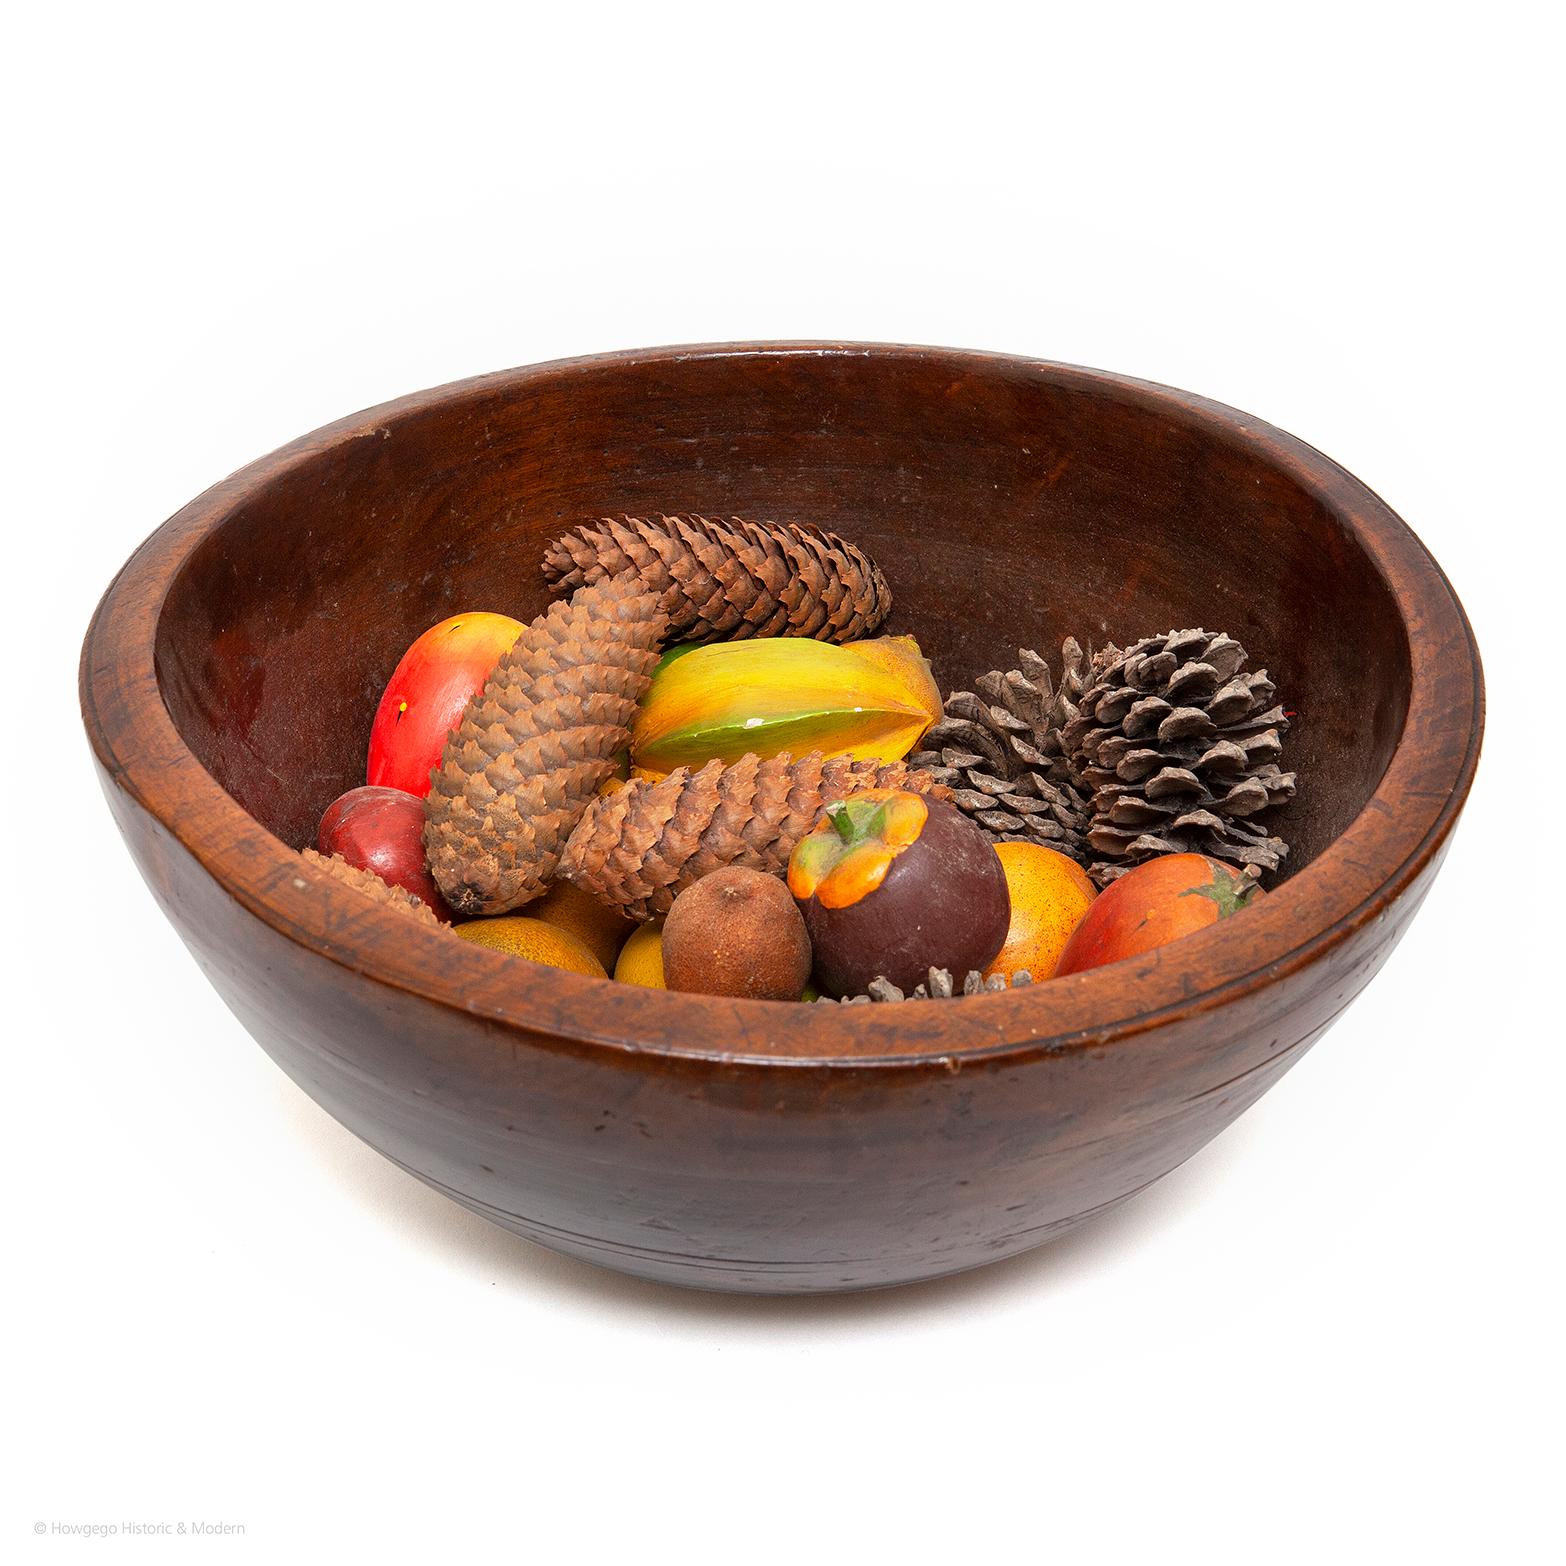 An exceptional, large 18th century treen turned fruitwood dairy bowl with a rich lustrous patina

Provenance: Collection of the late Geoffrey Harley, Pickwick End, Corsham

The fourteen pieces of 19th century wooden painted fruit can be